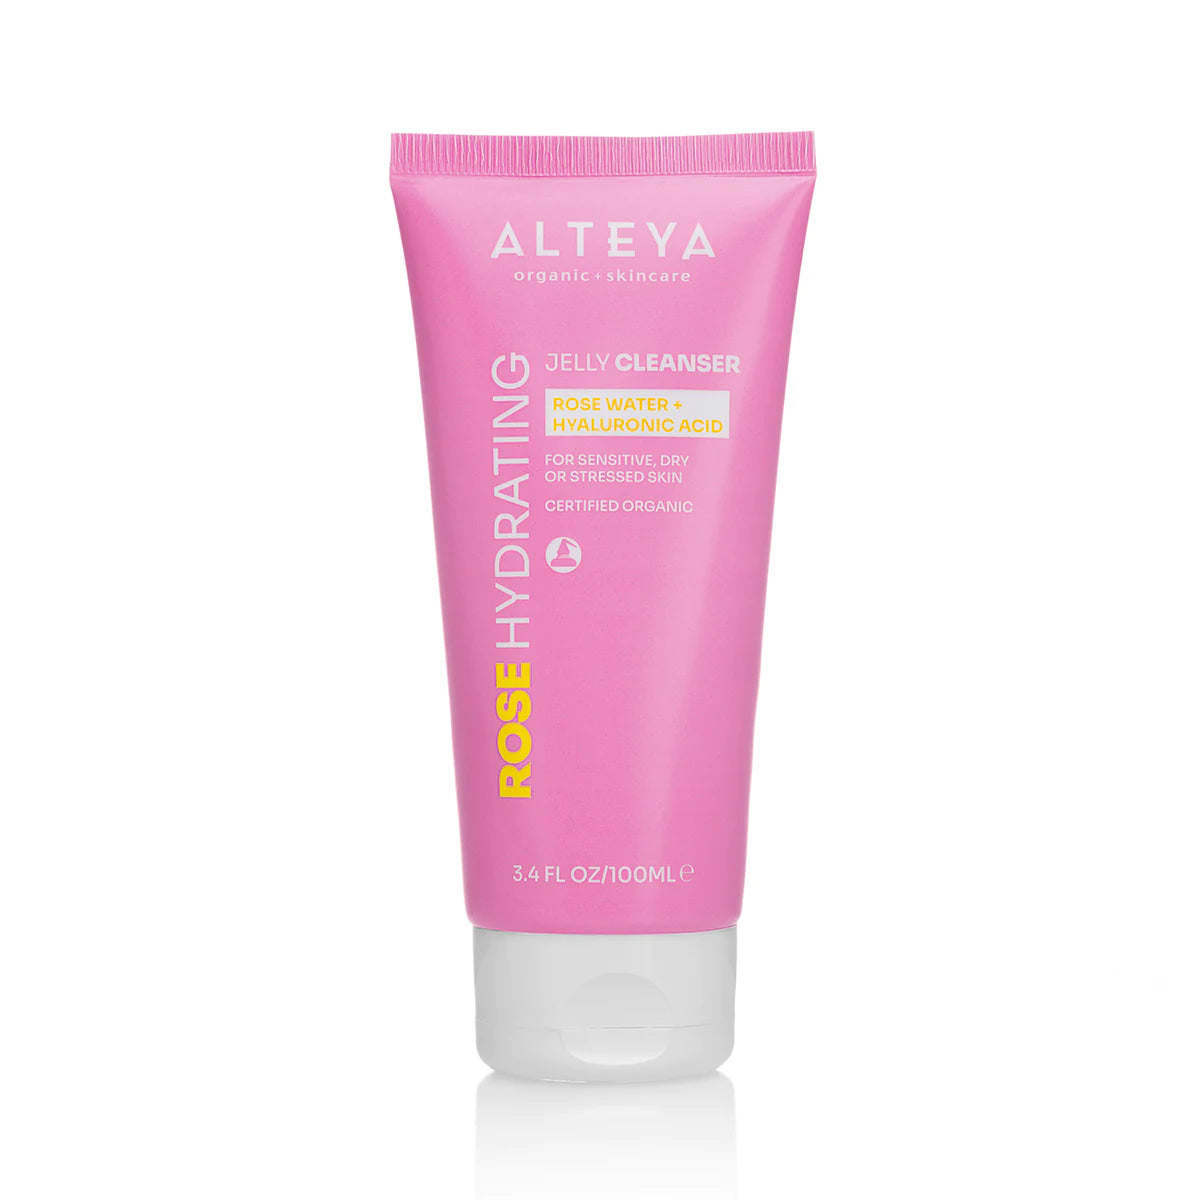 A tube of Alteya Organics Rose Hydrating Jelly Cleanser on a white background.